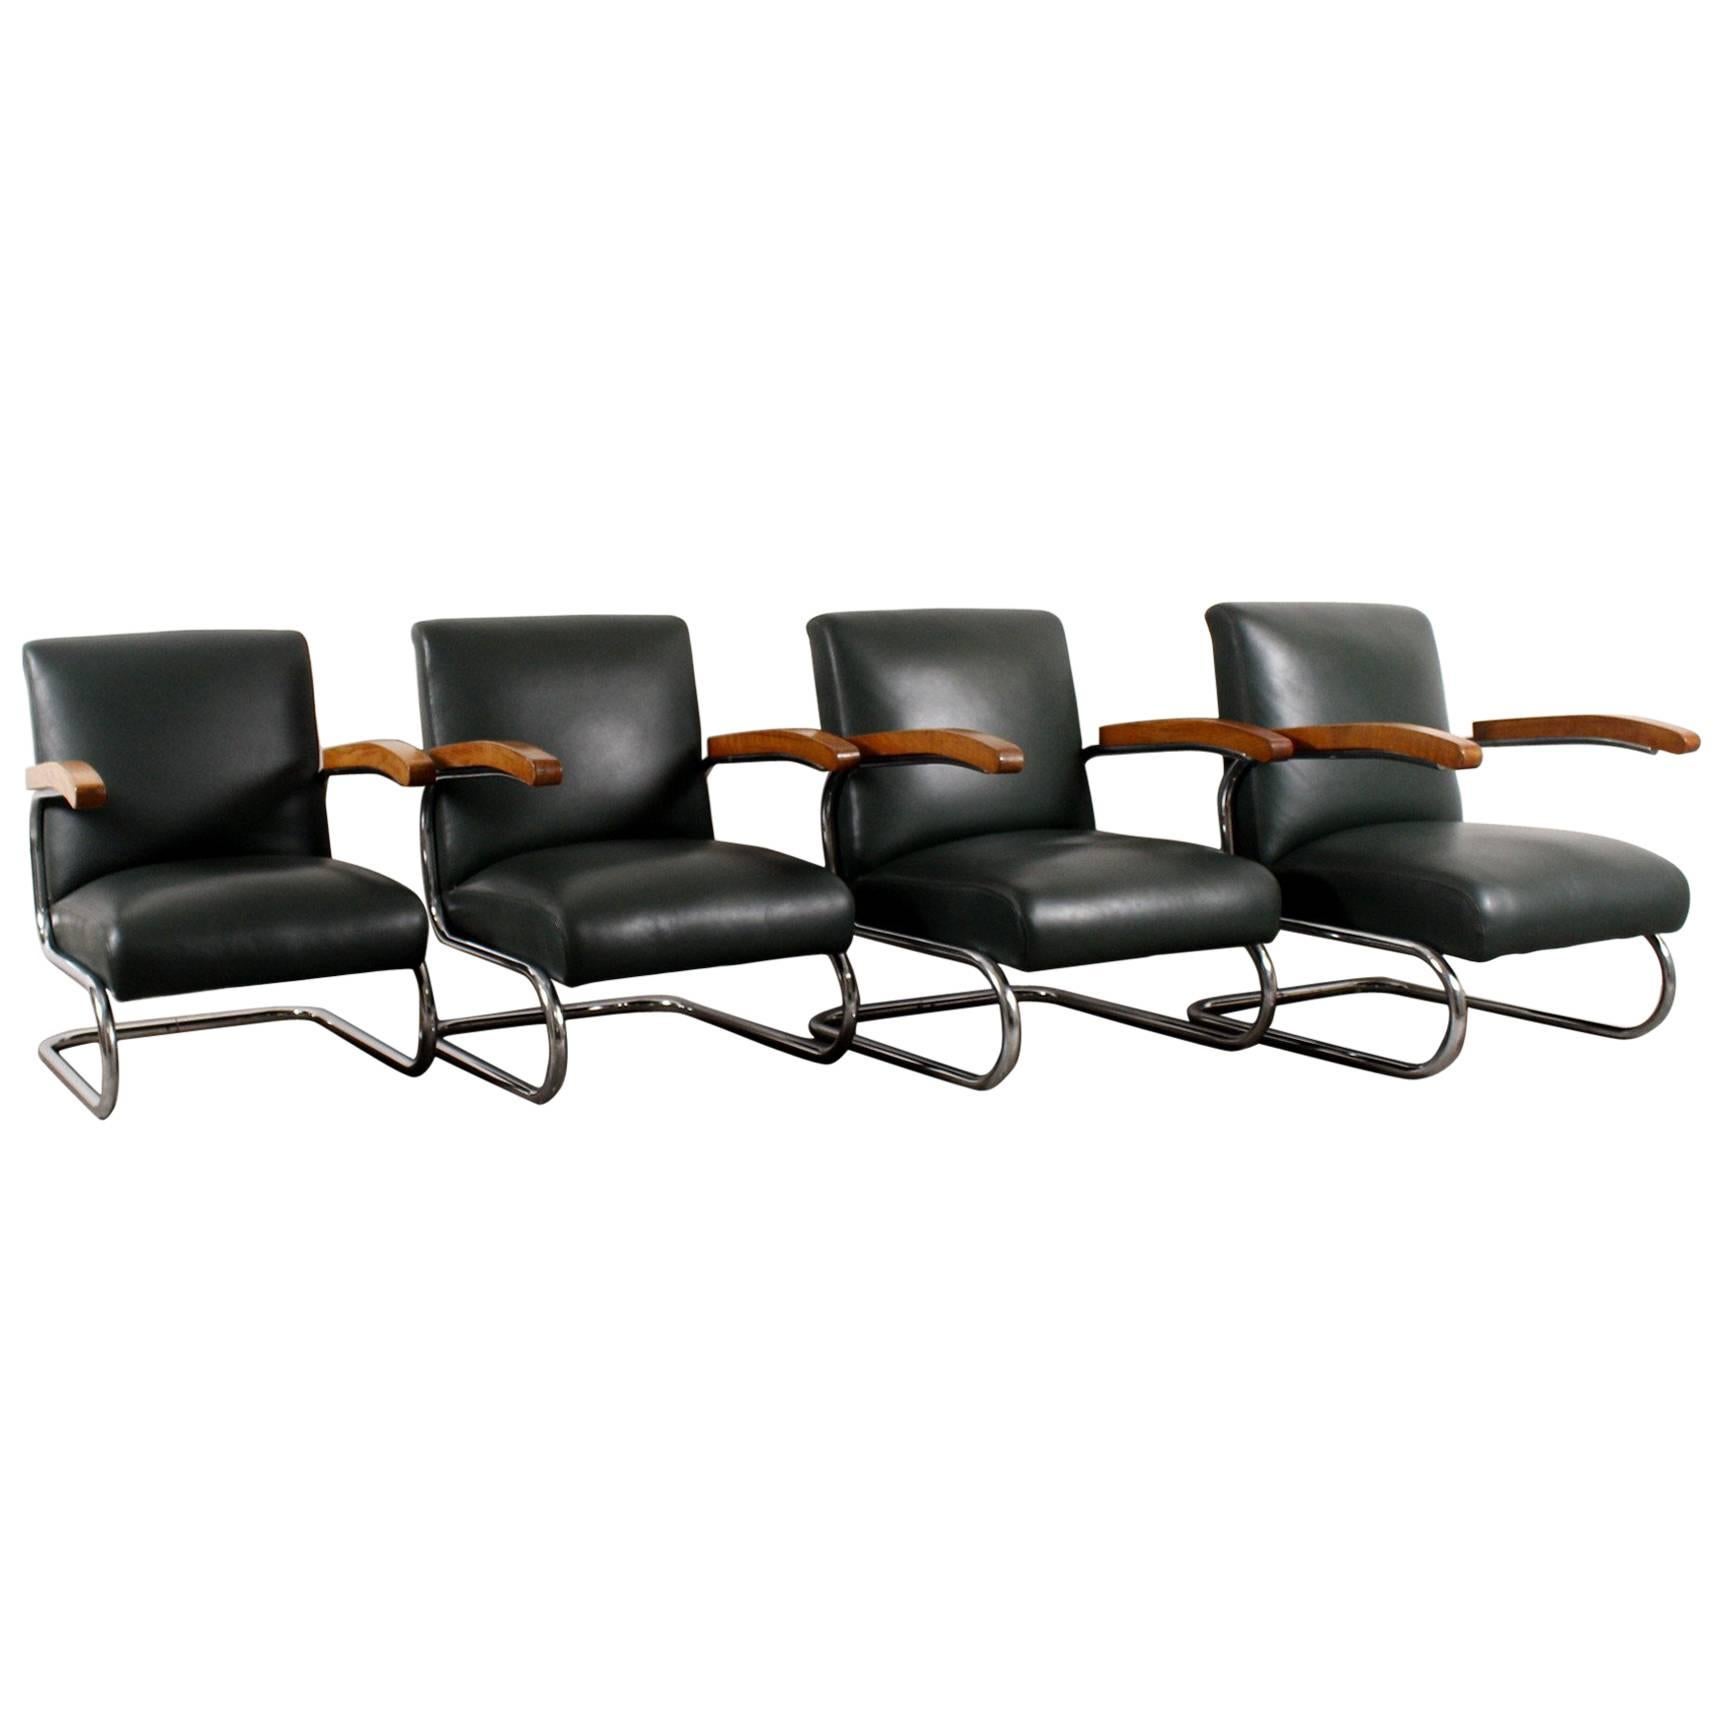 Four Thonet "S411" Lounge Chairs